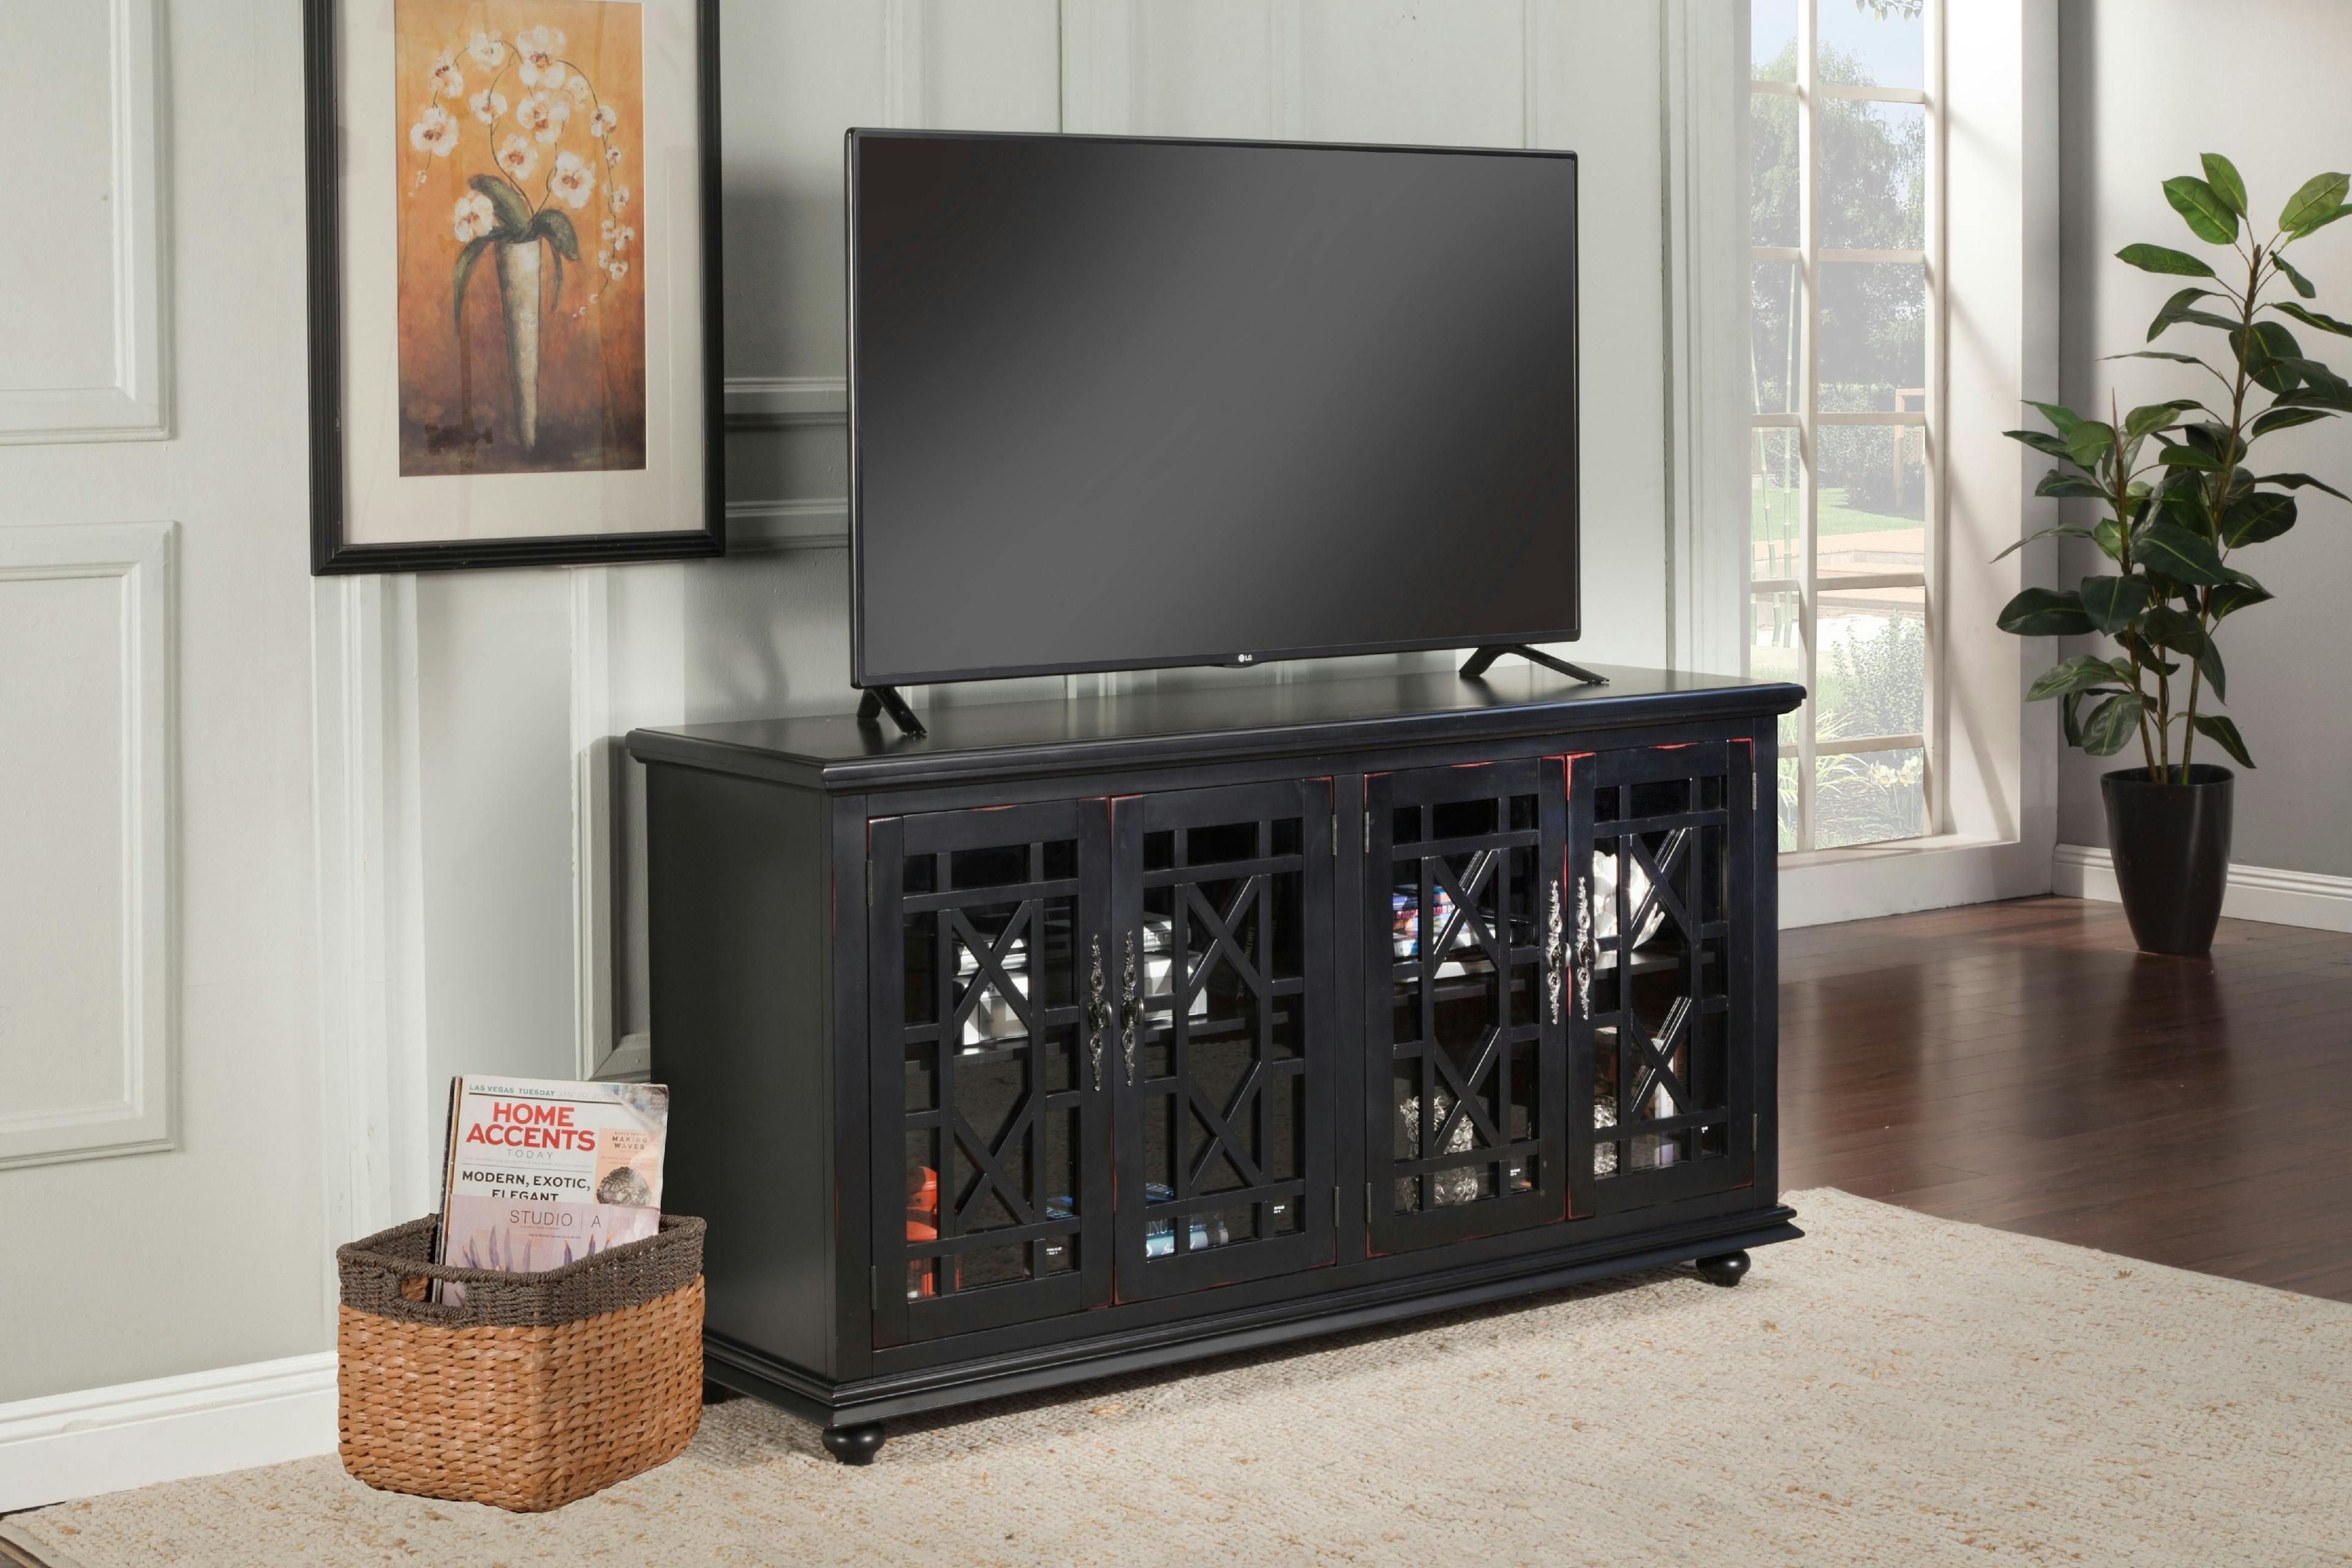 Parisian Antique Black 63" Transitional TV Stand with Glass Doors